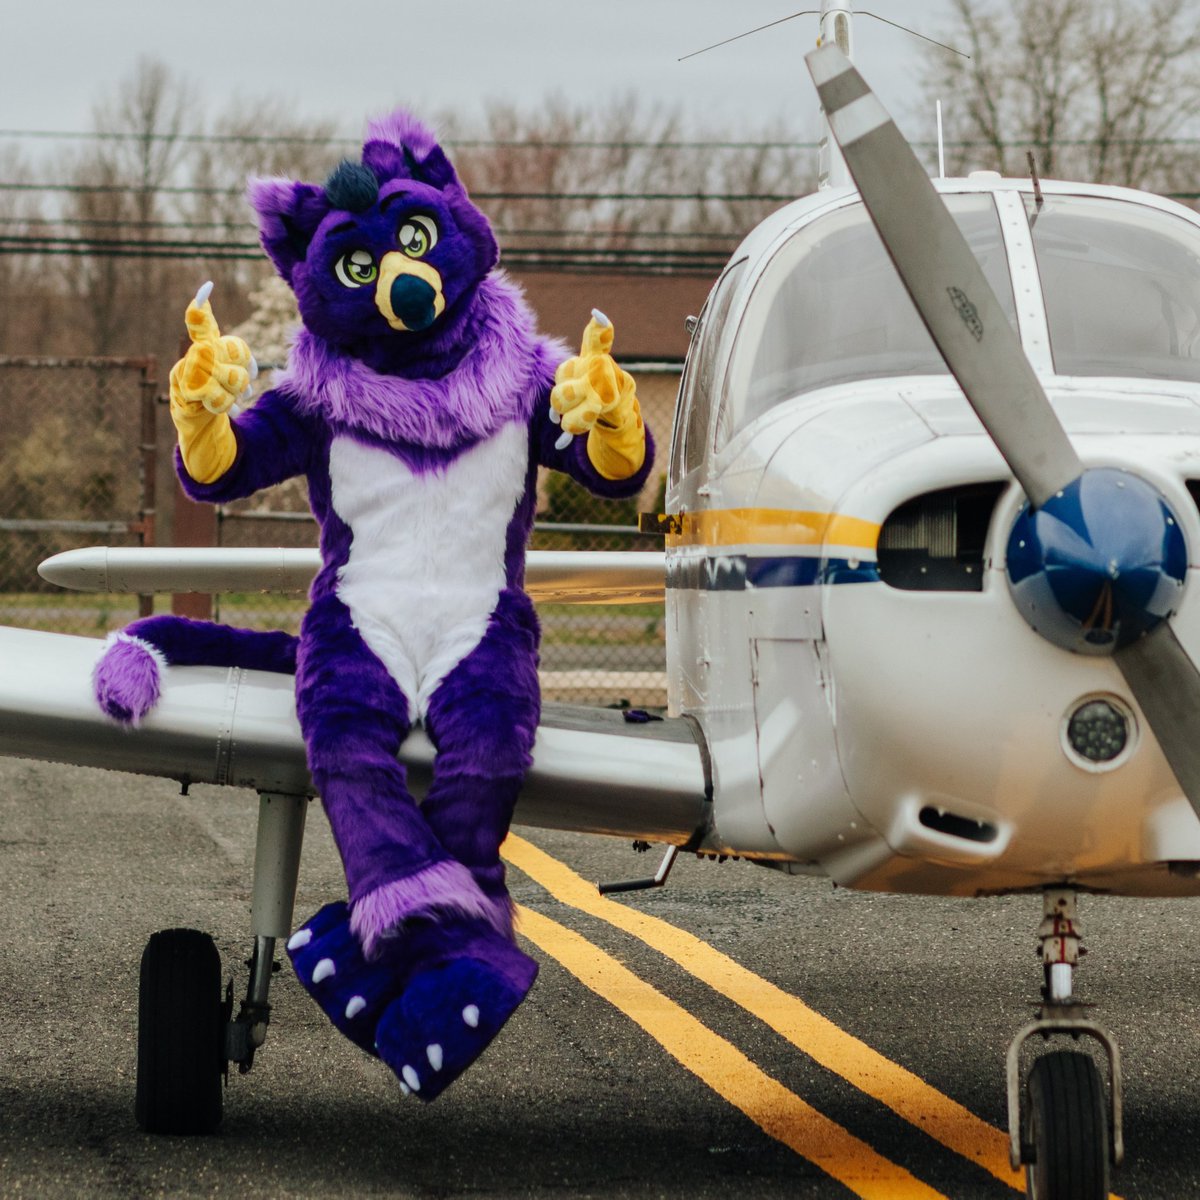 Vacation days awarded ✅
Plane tickets purchased ✅
Rental car booked ✅

It's airshow time! This bird's heading to Oshkosh 2021 next month!! 🛩️

#FursuitFriday #EAAairventure #Oshkosh2021